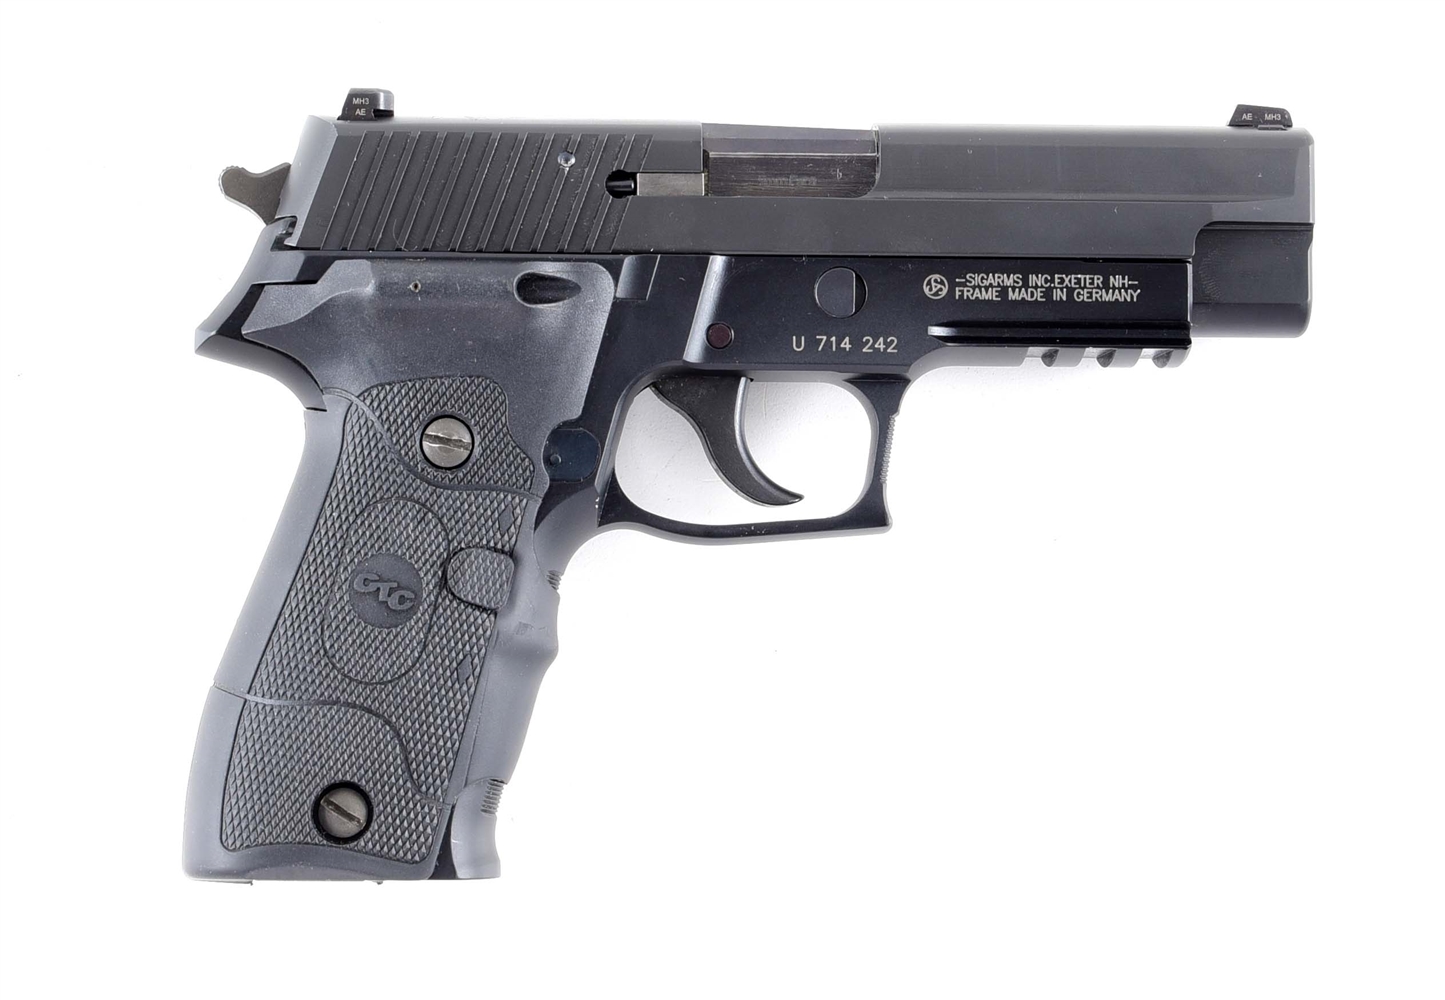 (M) ARMY SPECIAL FORCES SIG SAUER P226 SEMI-AUTOMATIC PISTOL.